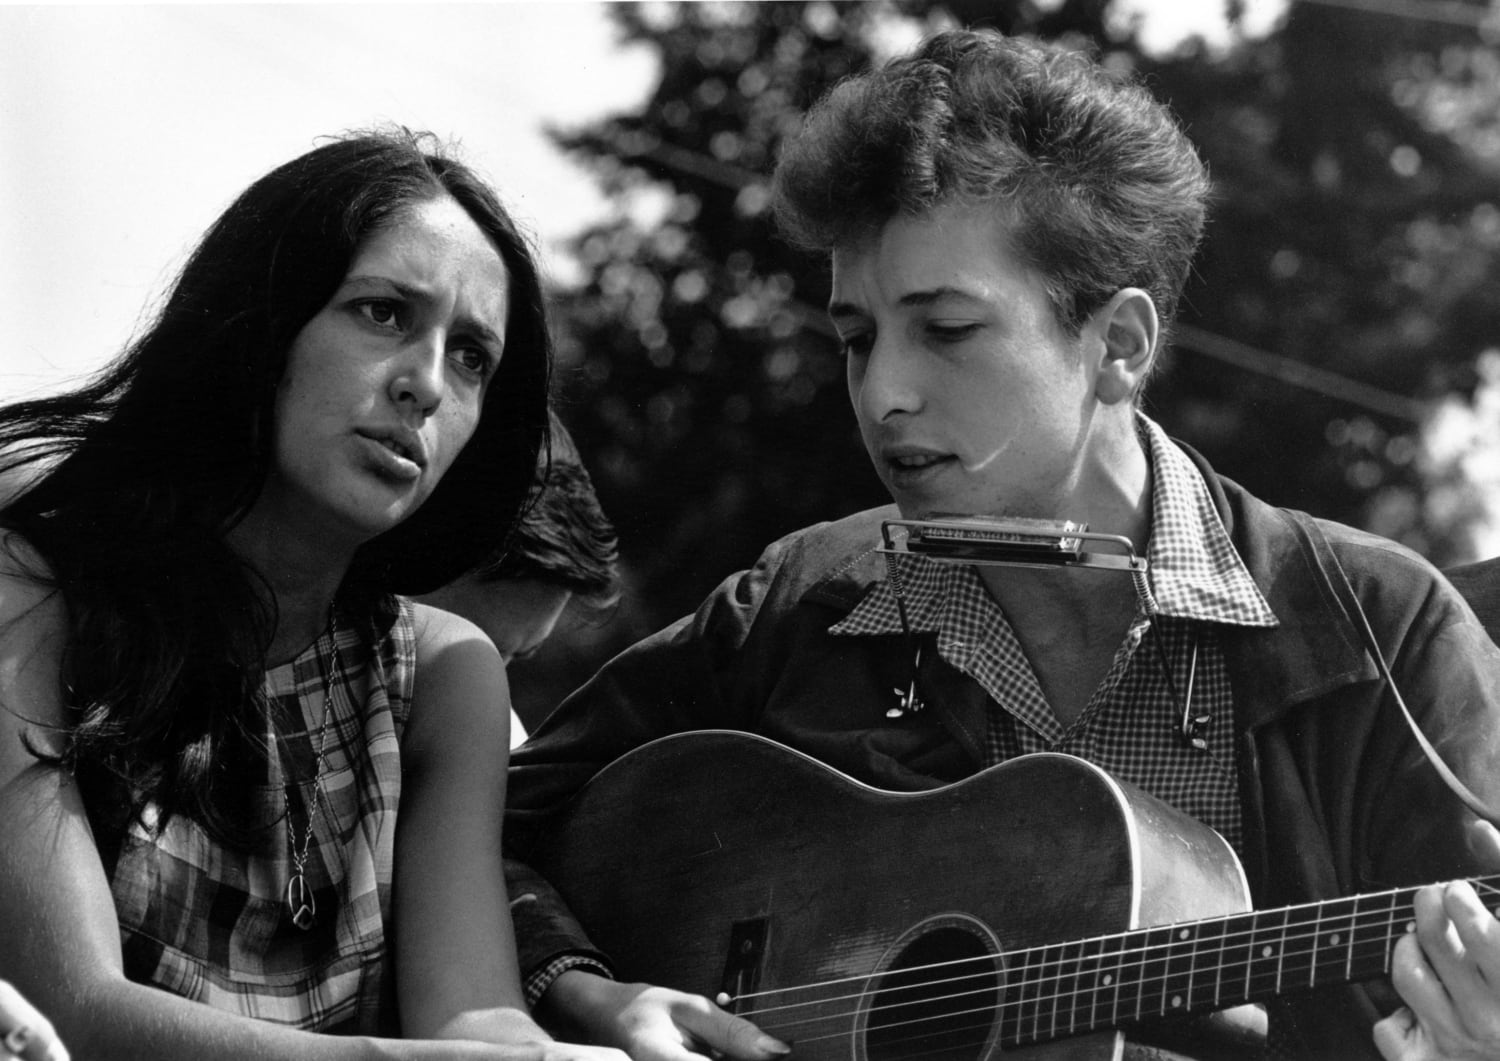 Folk musicians Joan Baez and Bob Dylan at the so-called „March on Washington“ on August 28, 1963. The demonstration with over 200,000 people was one of the highlights of the civil rights movement in the States. Martin Luther King gave his "I have a dream" speech there.